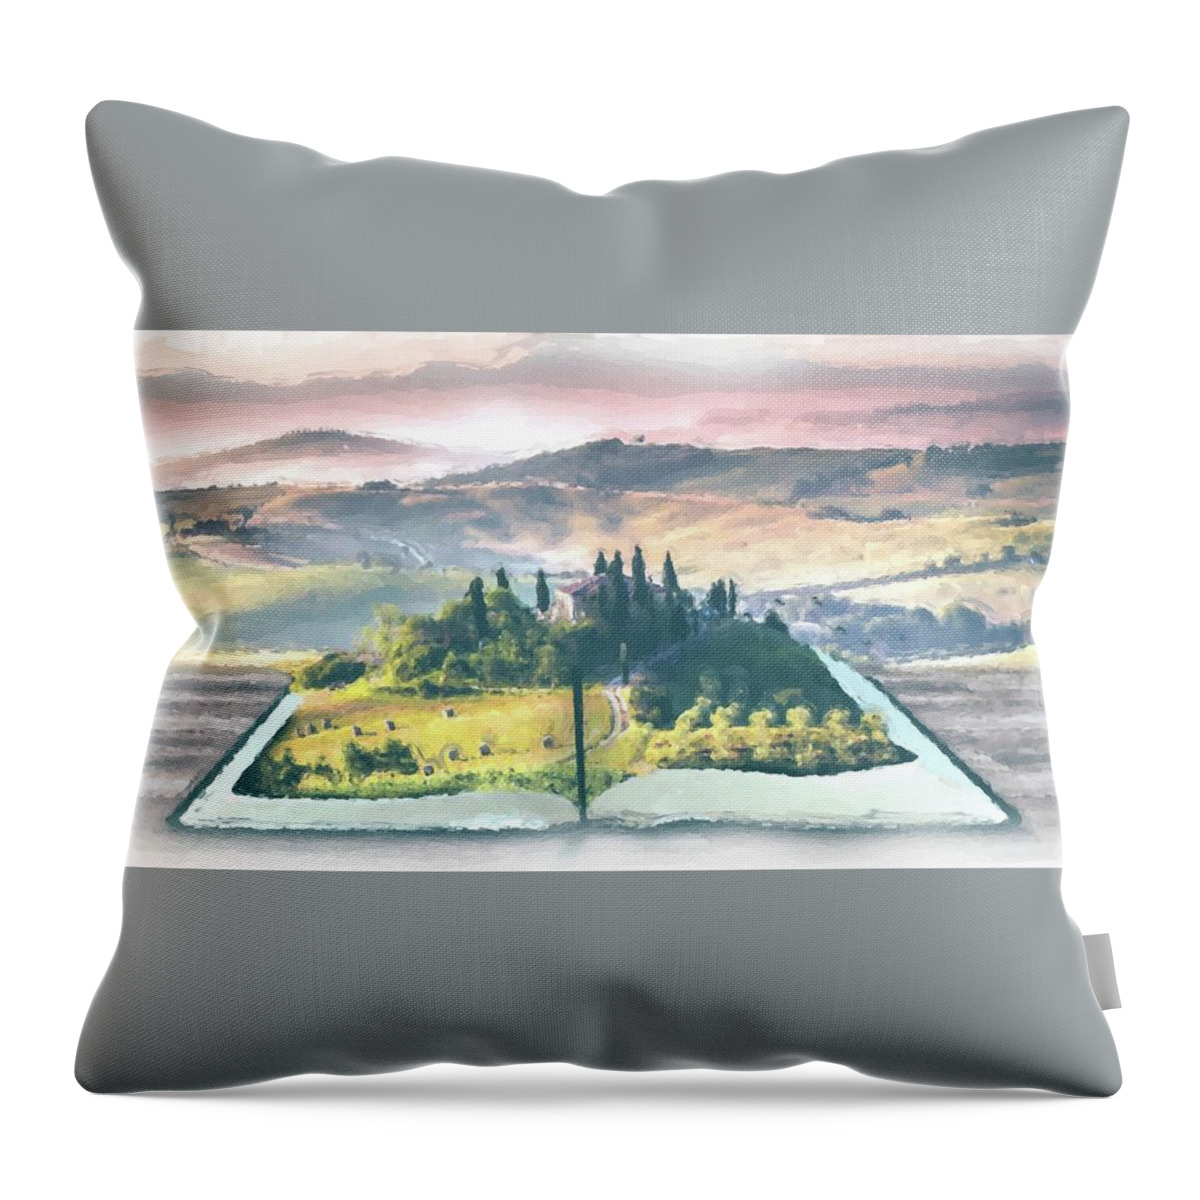 Book Life Throw Pillow featuring the painting Book Life by Harry Warrick